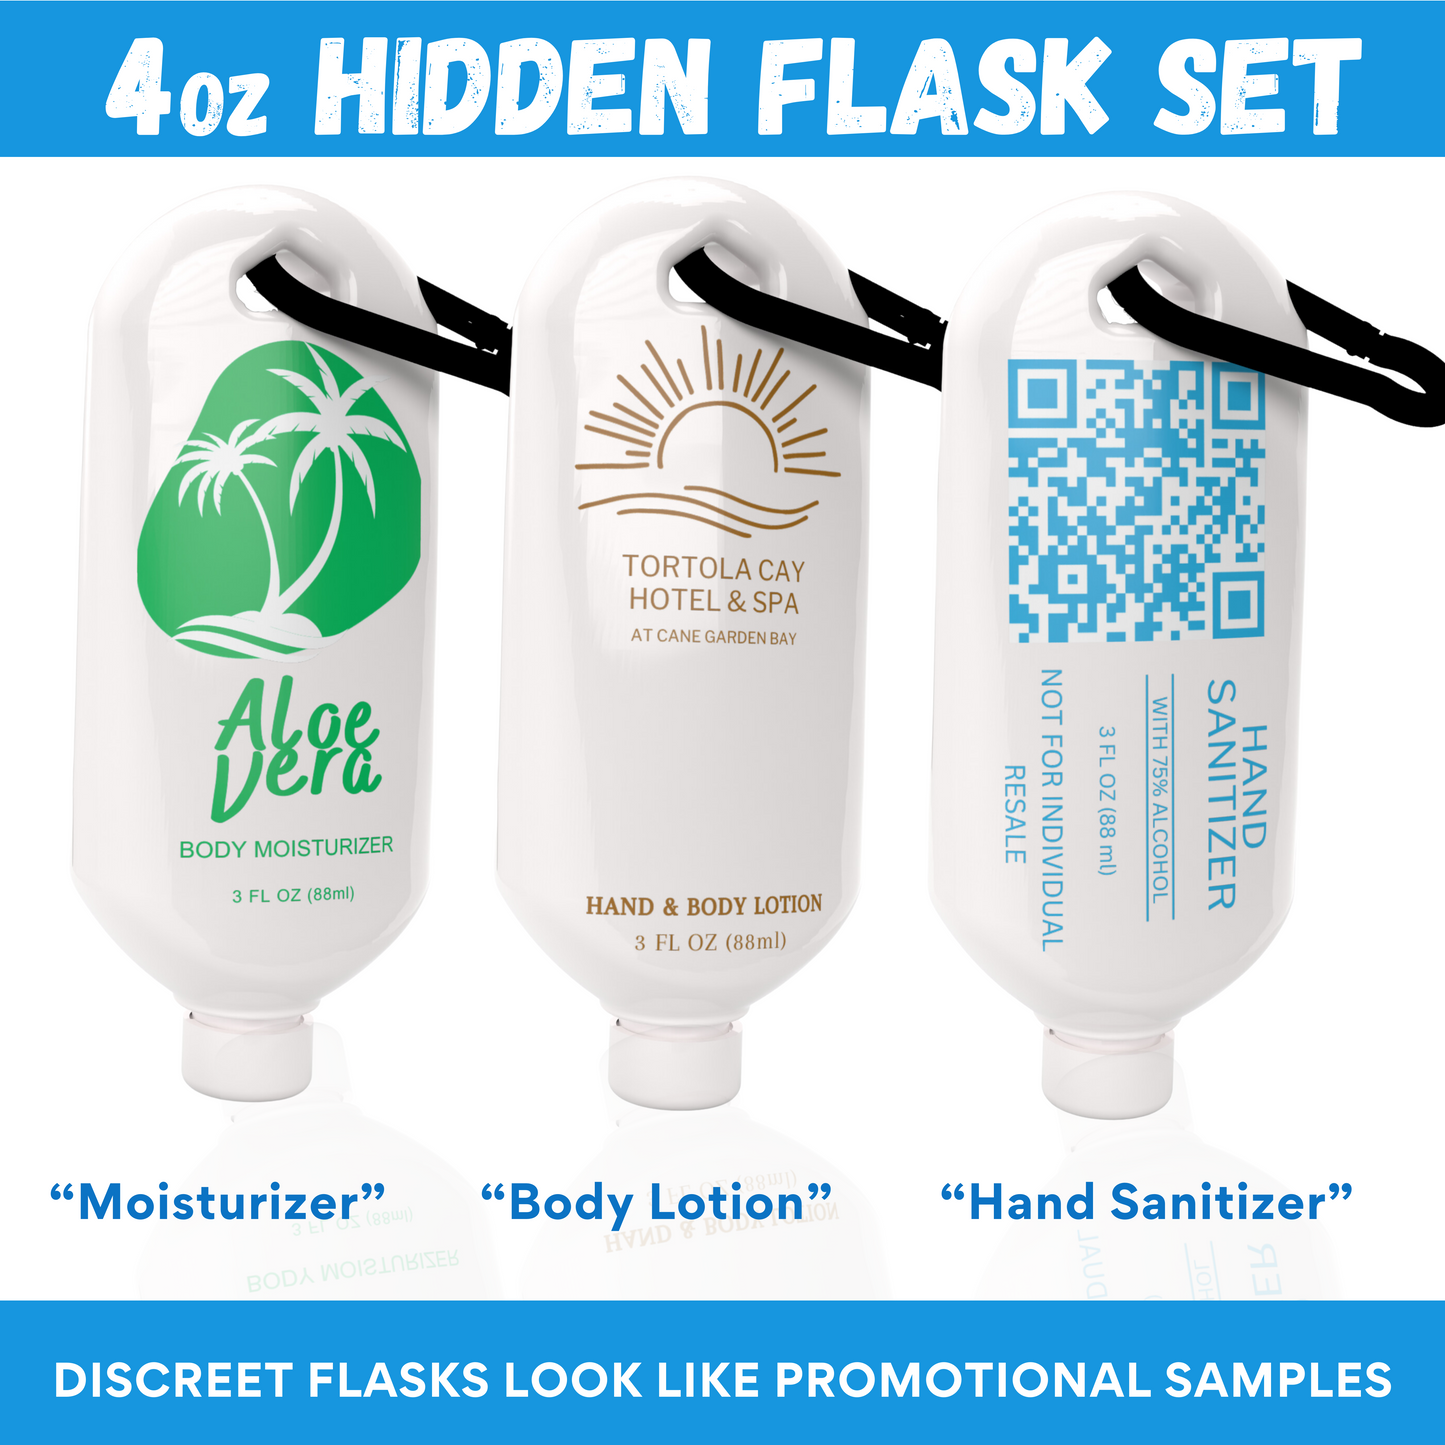 Hidden Flask For Liquor - Set of 3 Discreet Flask 4oz Empty Bottle Liquor Disguise Containers Looks Like Lotion - Secret Flask Hidden by Classy Wino Always Drink Responsibly